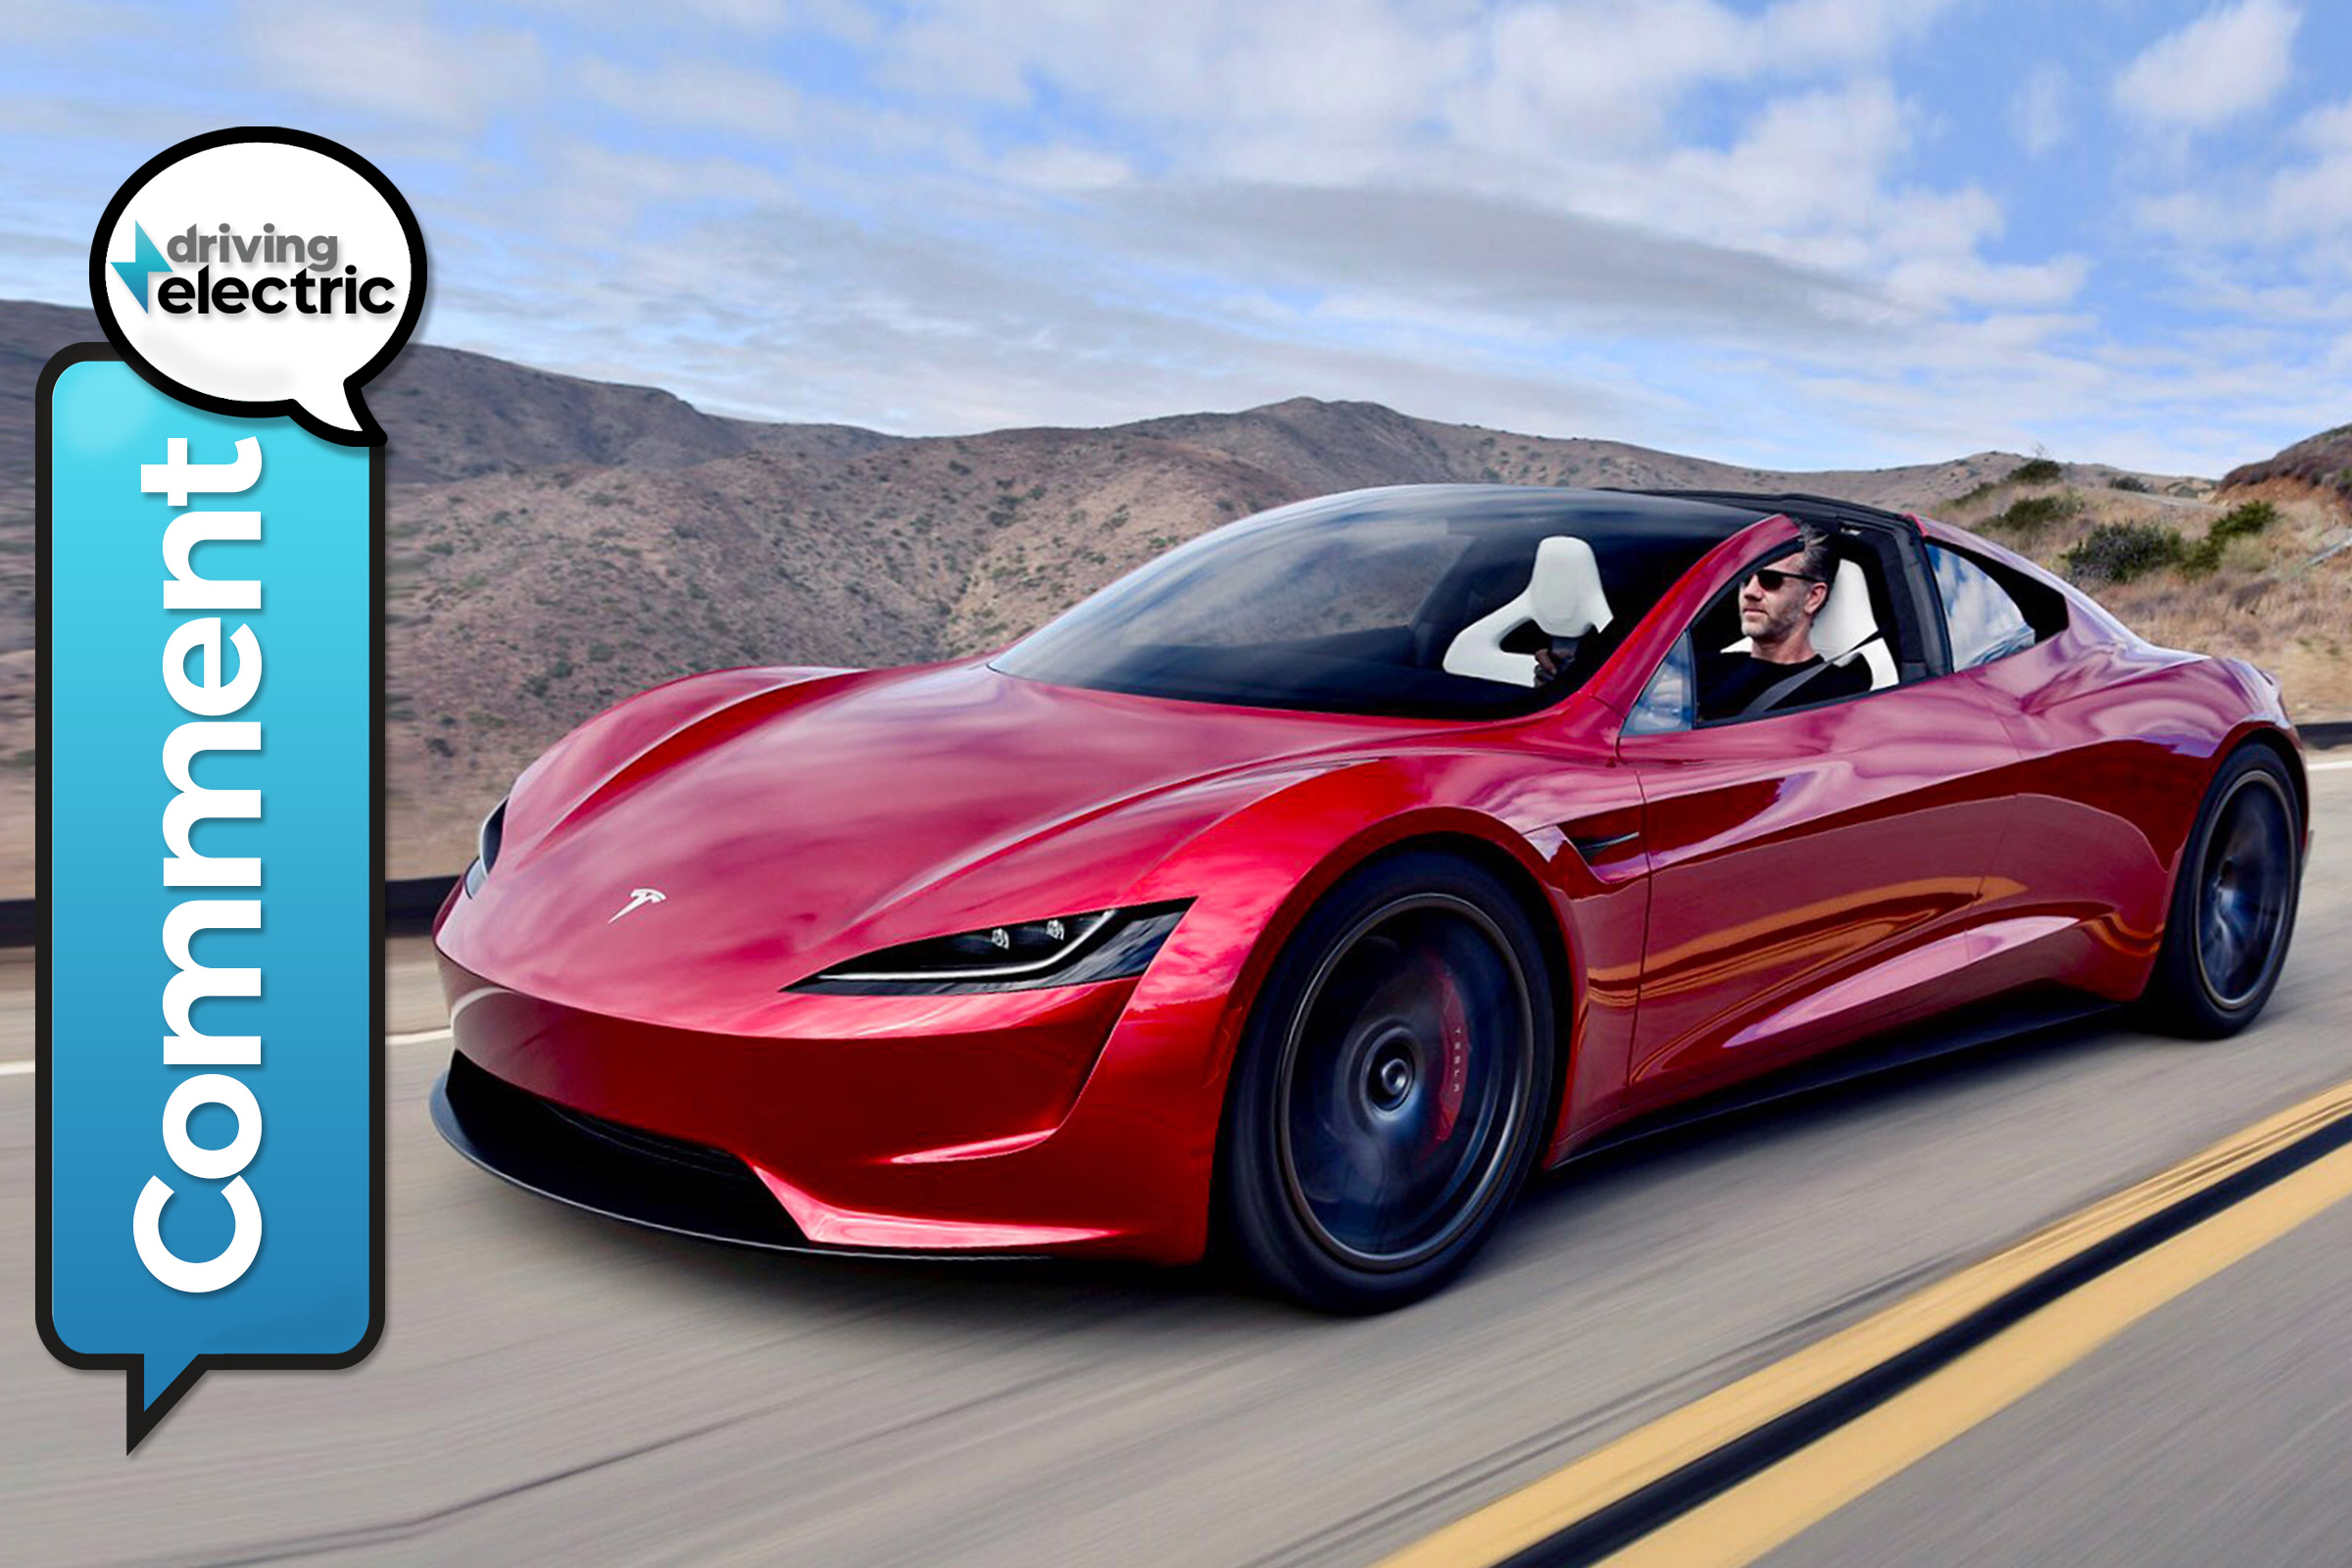 How Tesla can get a 600mile range from the new Roadster DrivingElectric